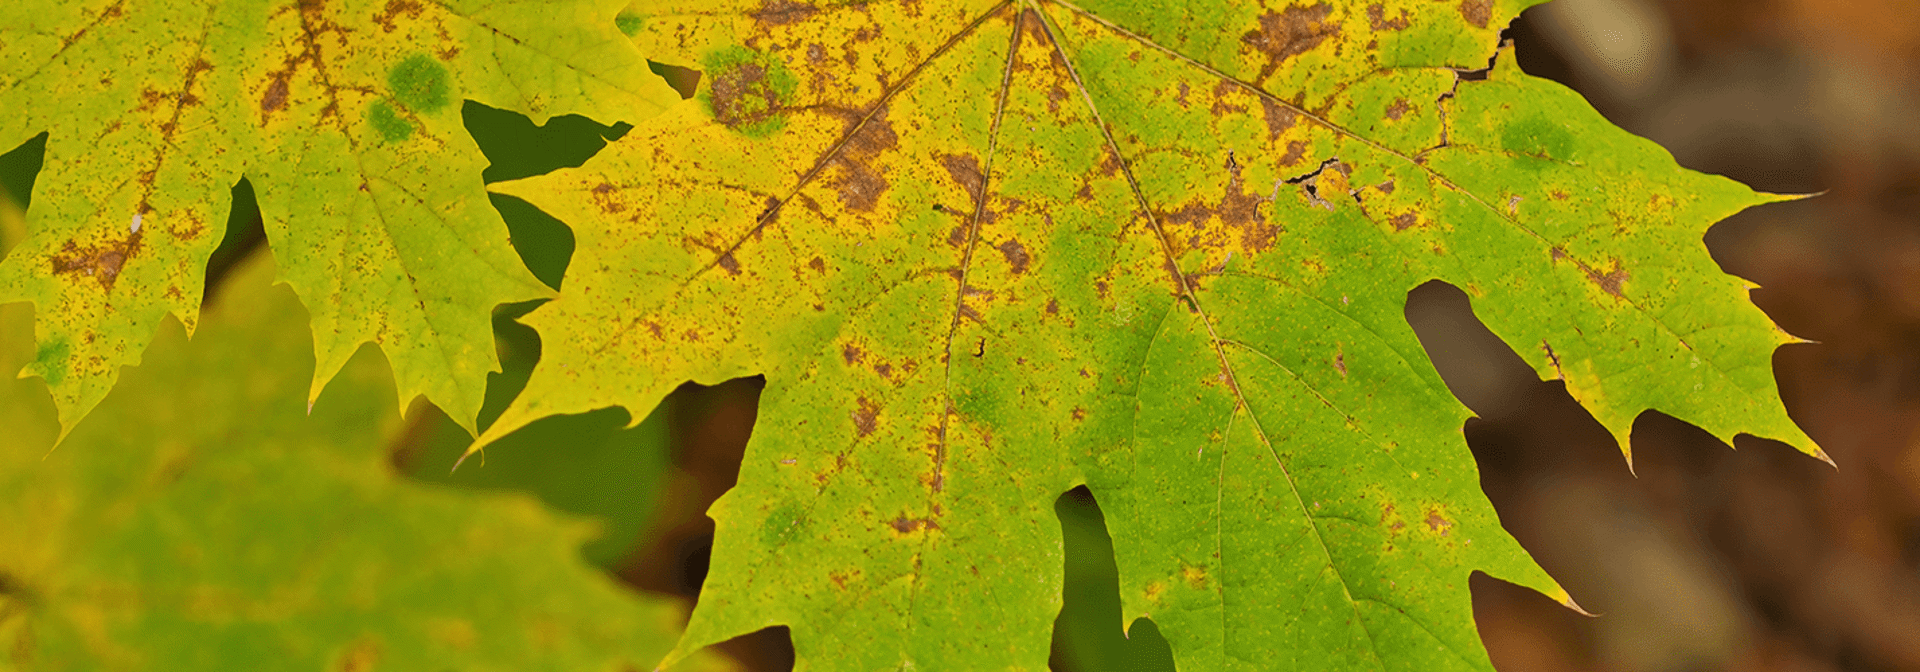 Garden Q & A: Why is my maple tree is dropping its green leaves?